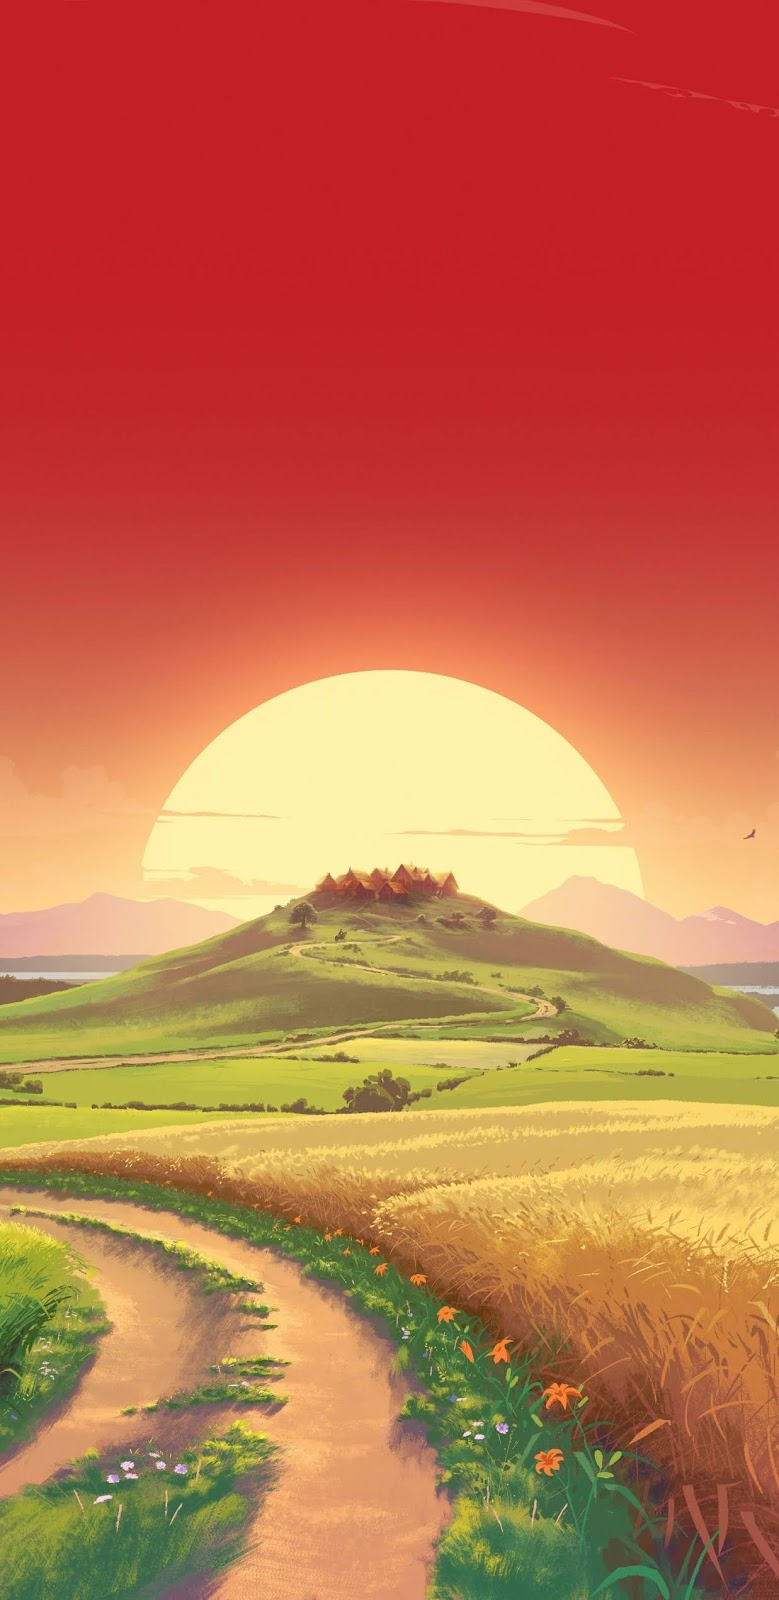 Sunset in the hill